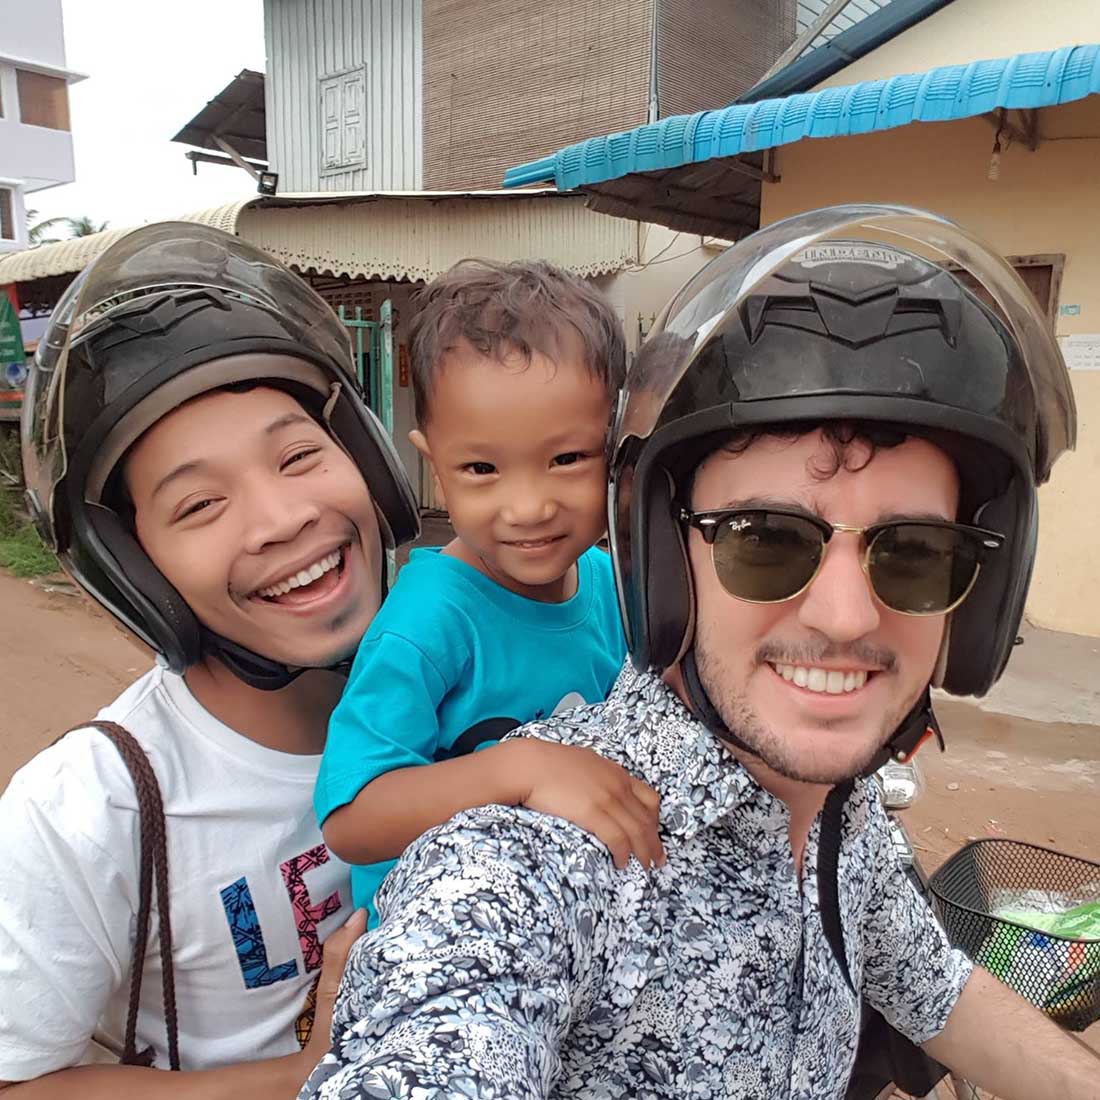 "We always knew we wanted to help the LGBTIQ+ community" - Jason and Tola from Siem Reap, Cambodia